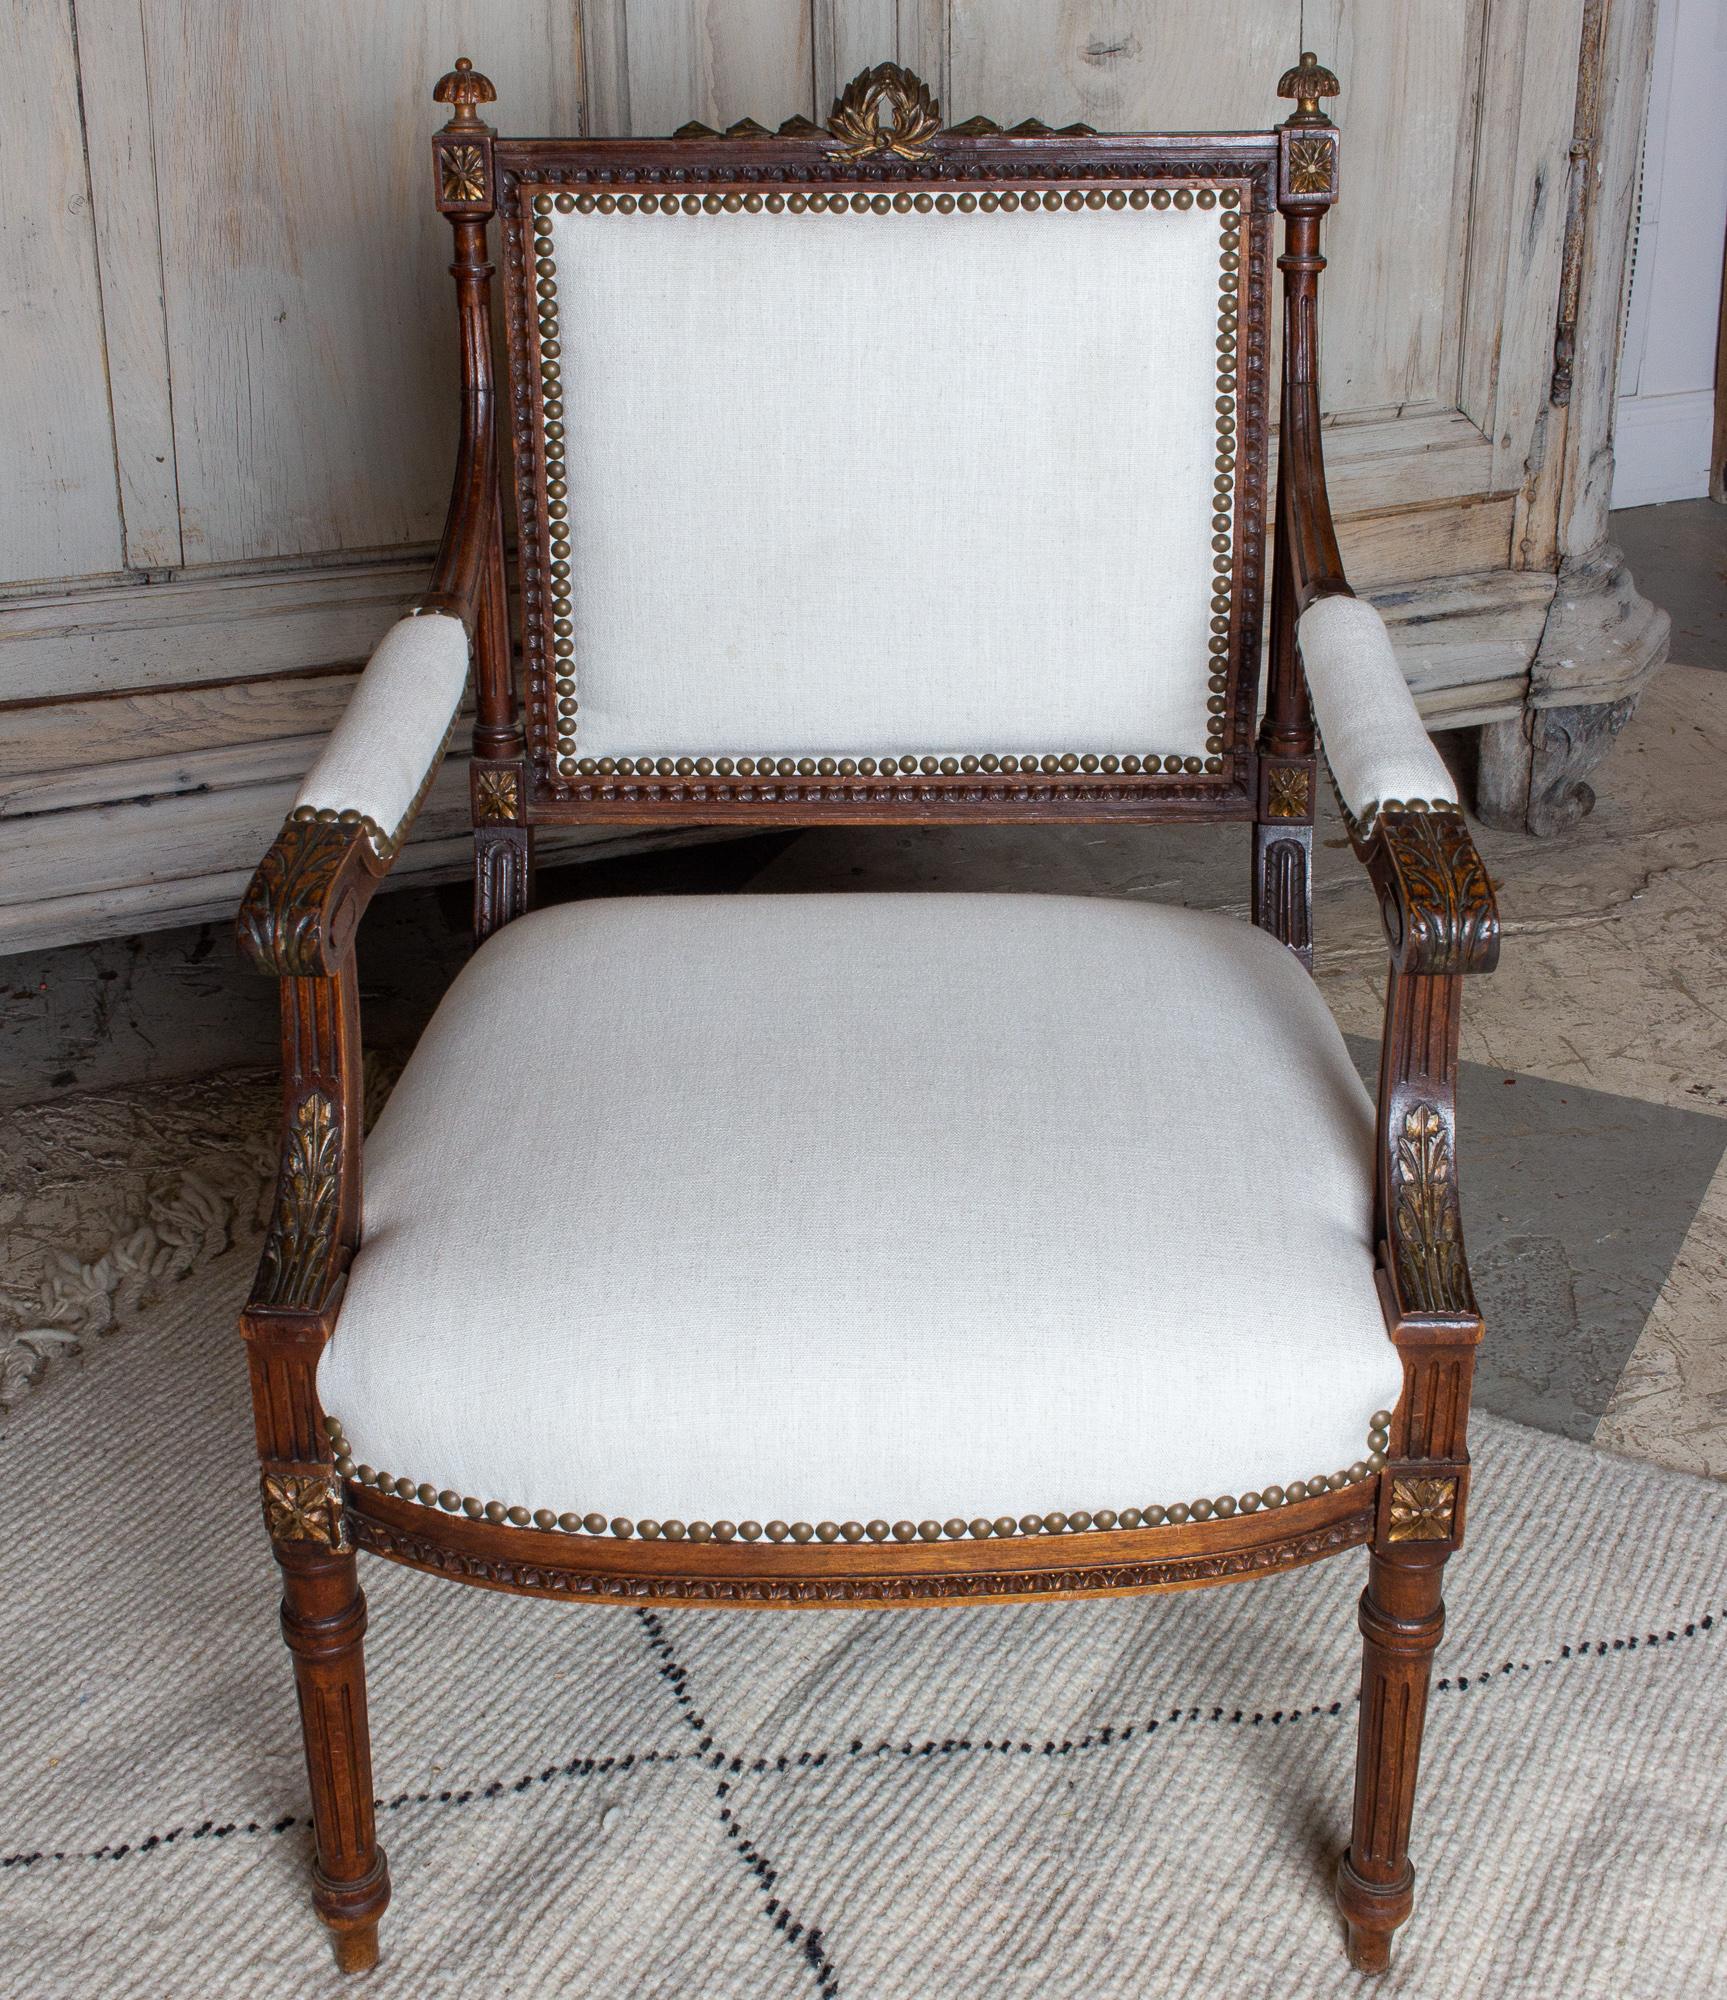 A lovely pairing of antique French hand-carved Louis XVI style armchairs with new linen upholstery. The chairs have classical carvings and gilt accents. Antiqued brass nailhead trim and a neutral linen fabric ensure both elegant and versatile use in